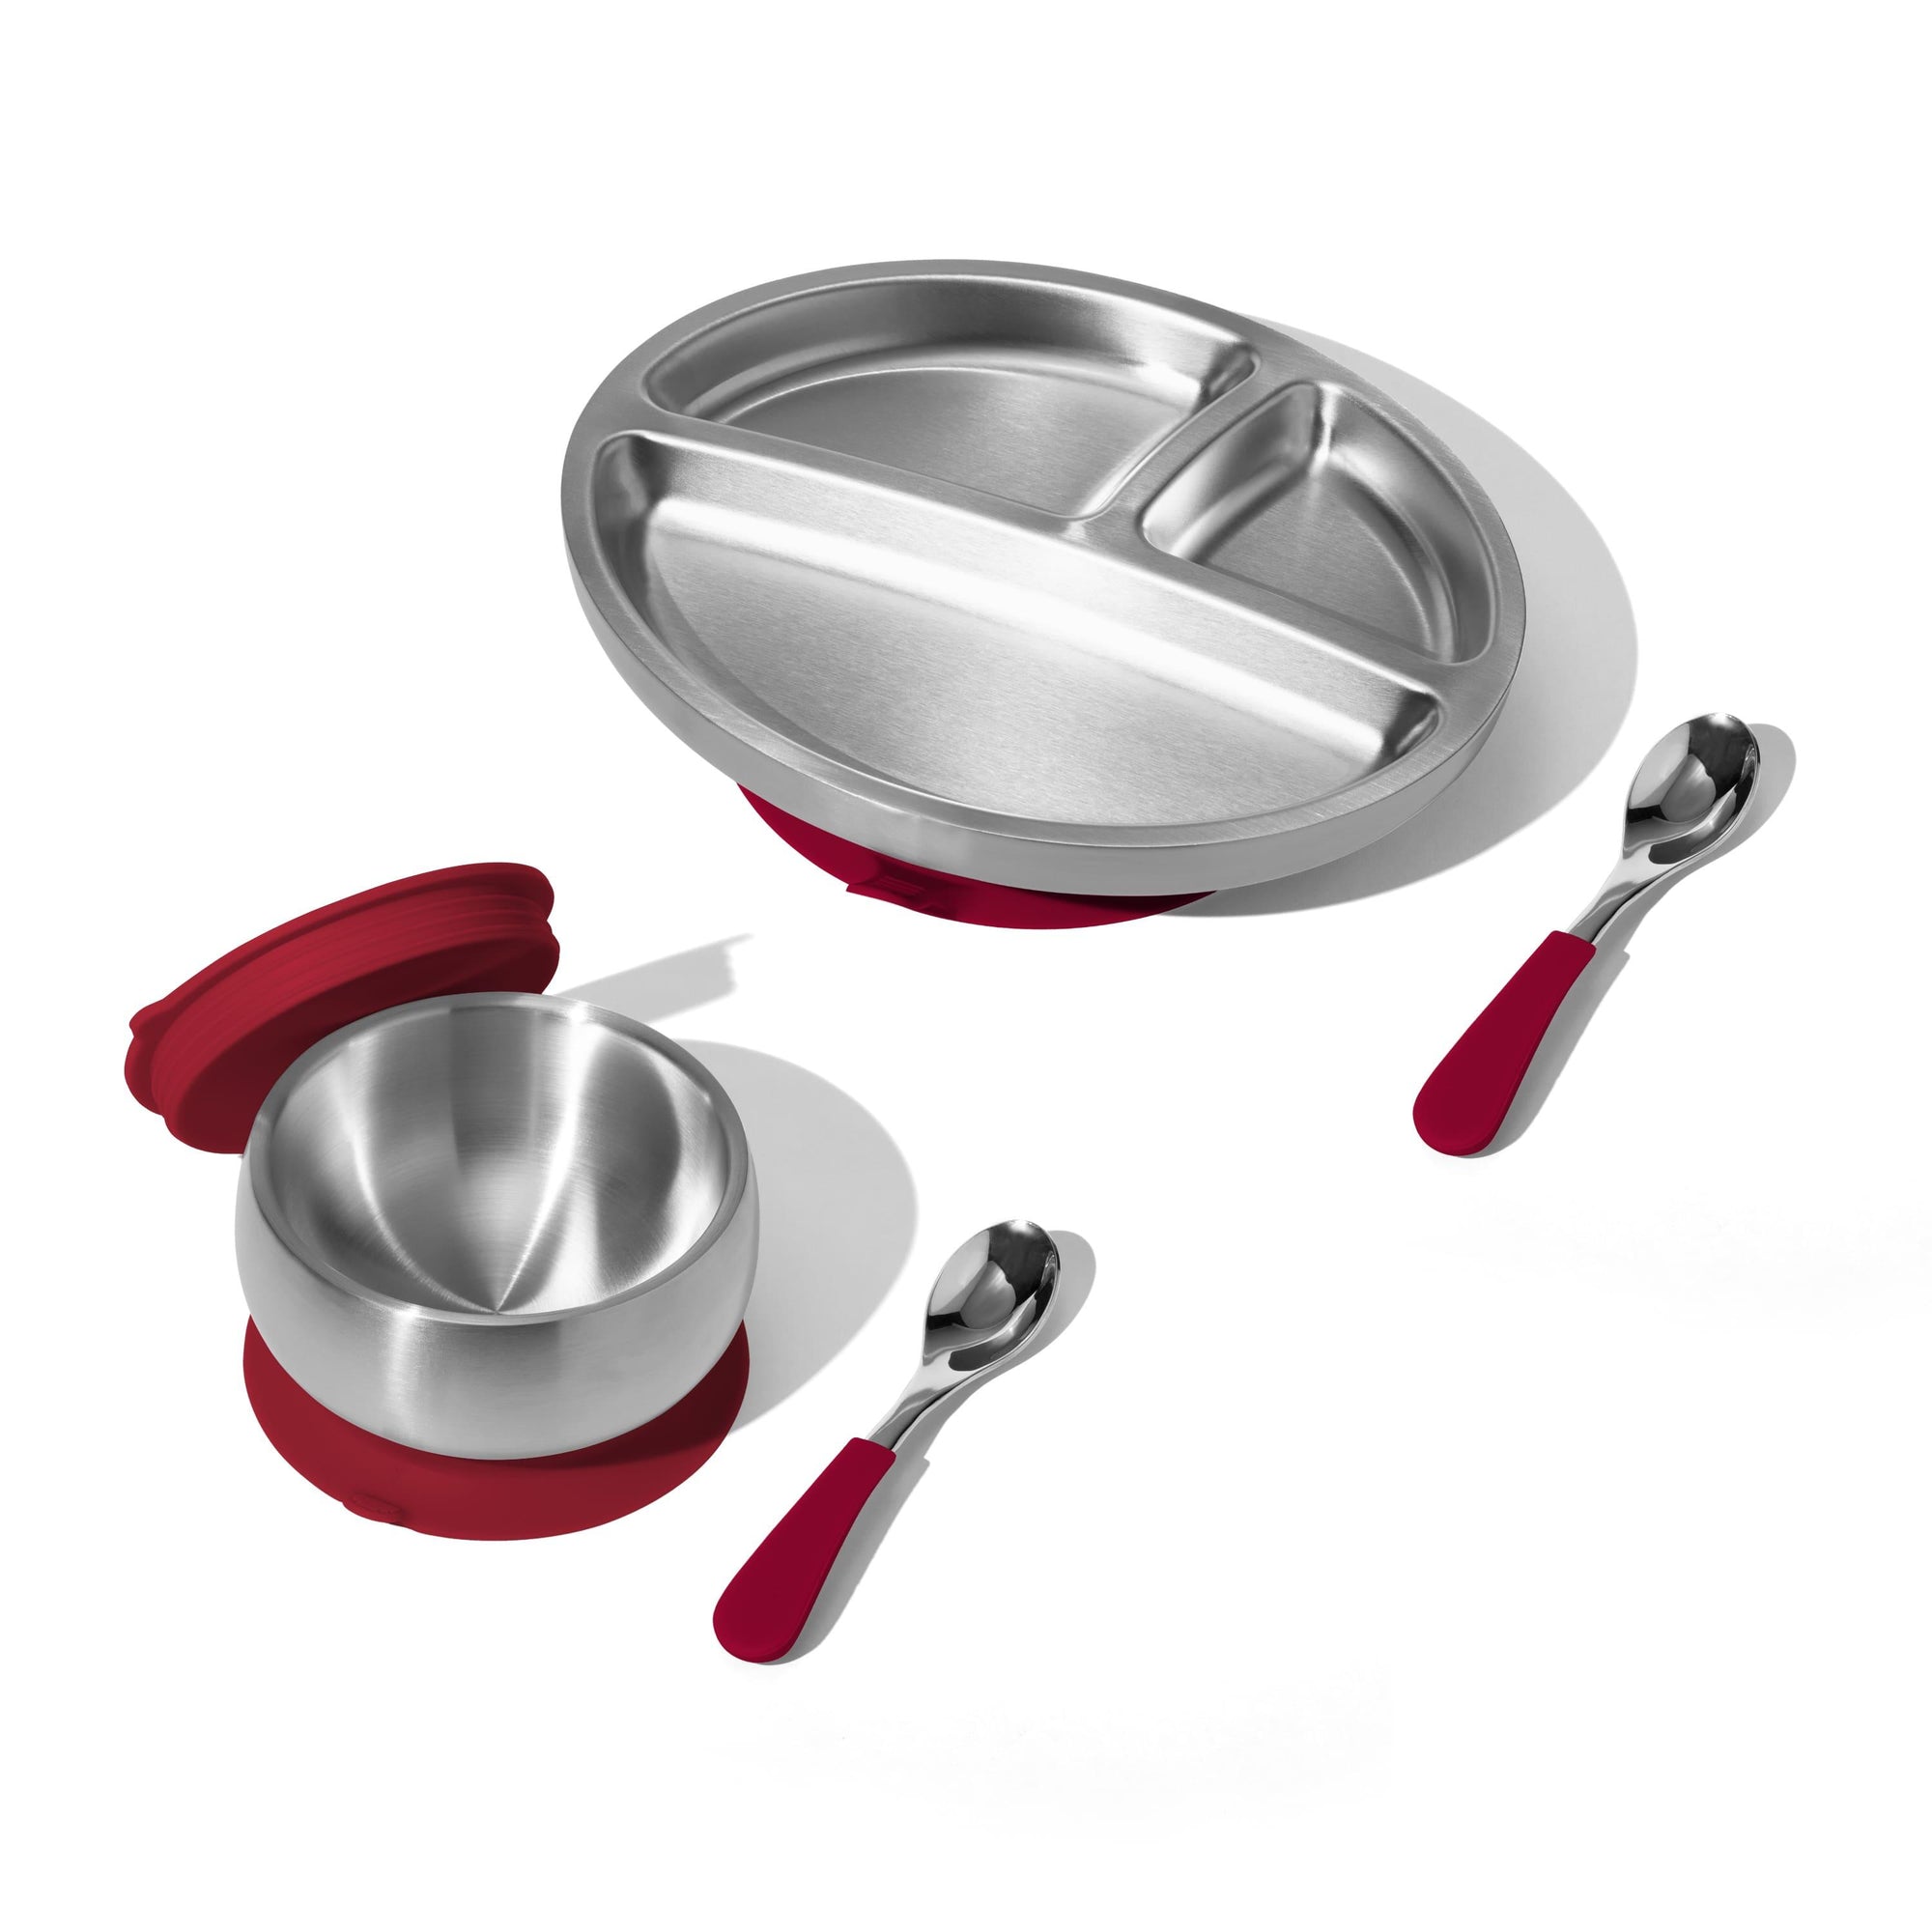 Stainless Steel Rainbow Baby Gift Set - Avanchy Sustainable Baby Dishware